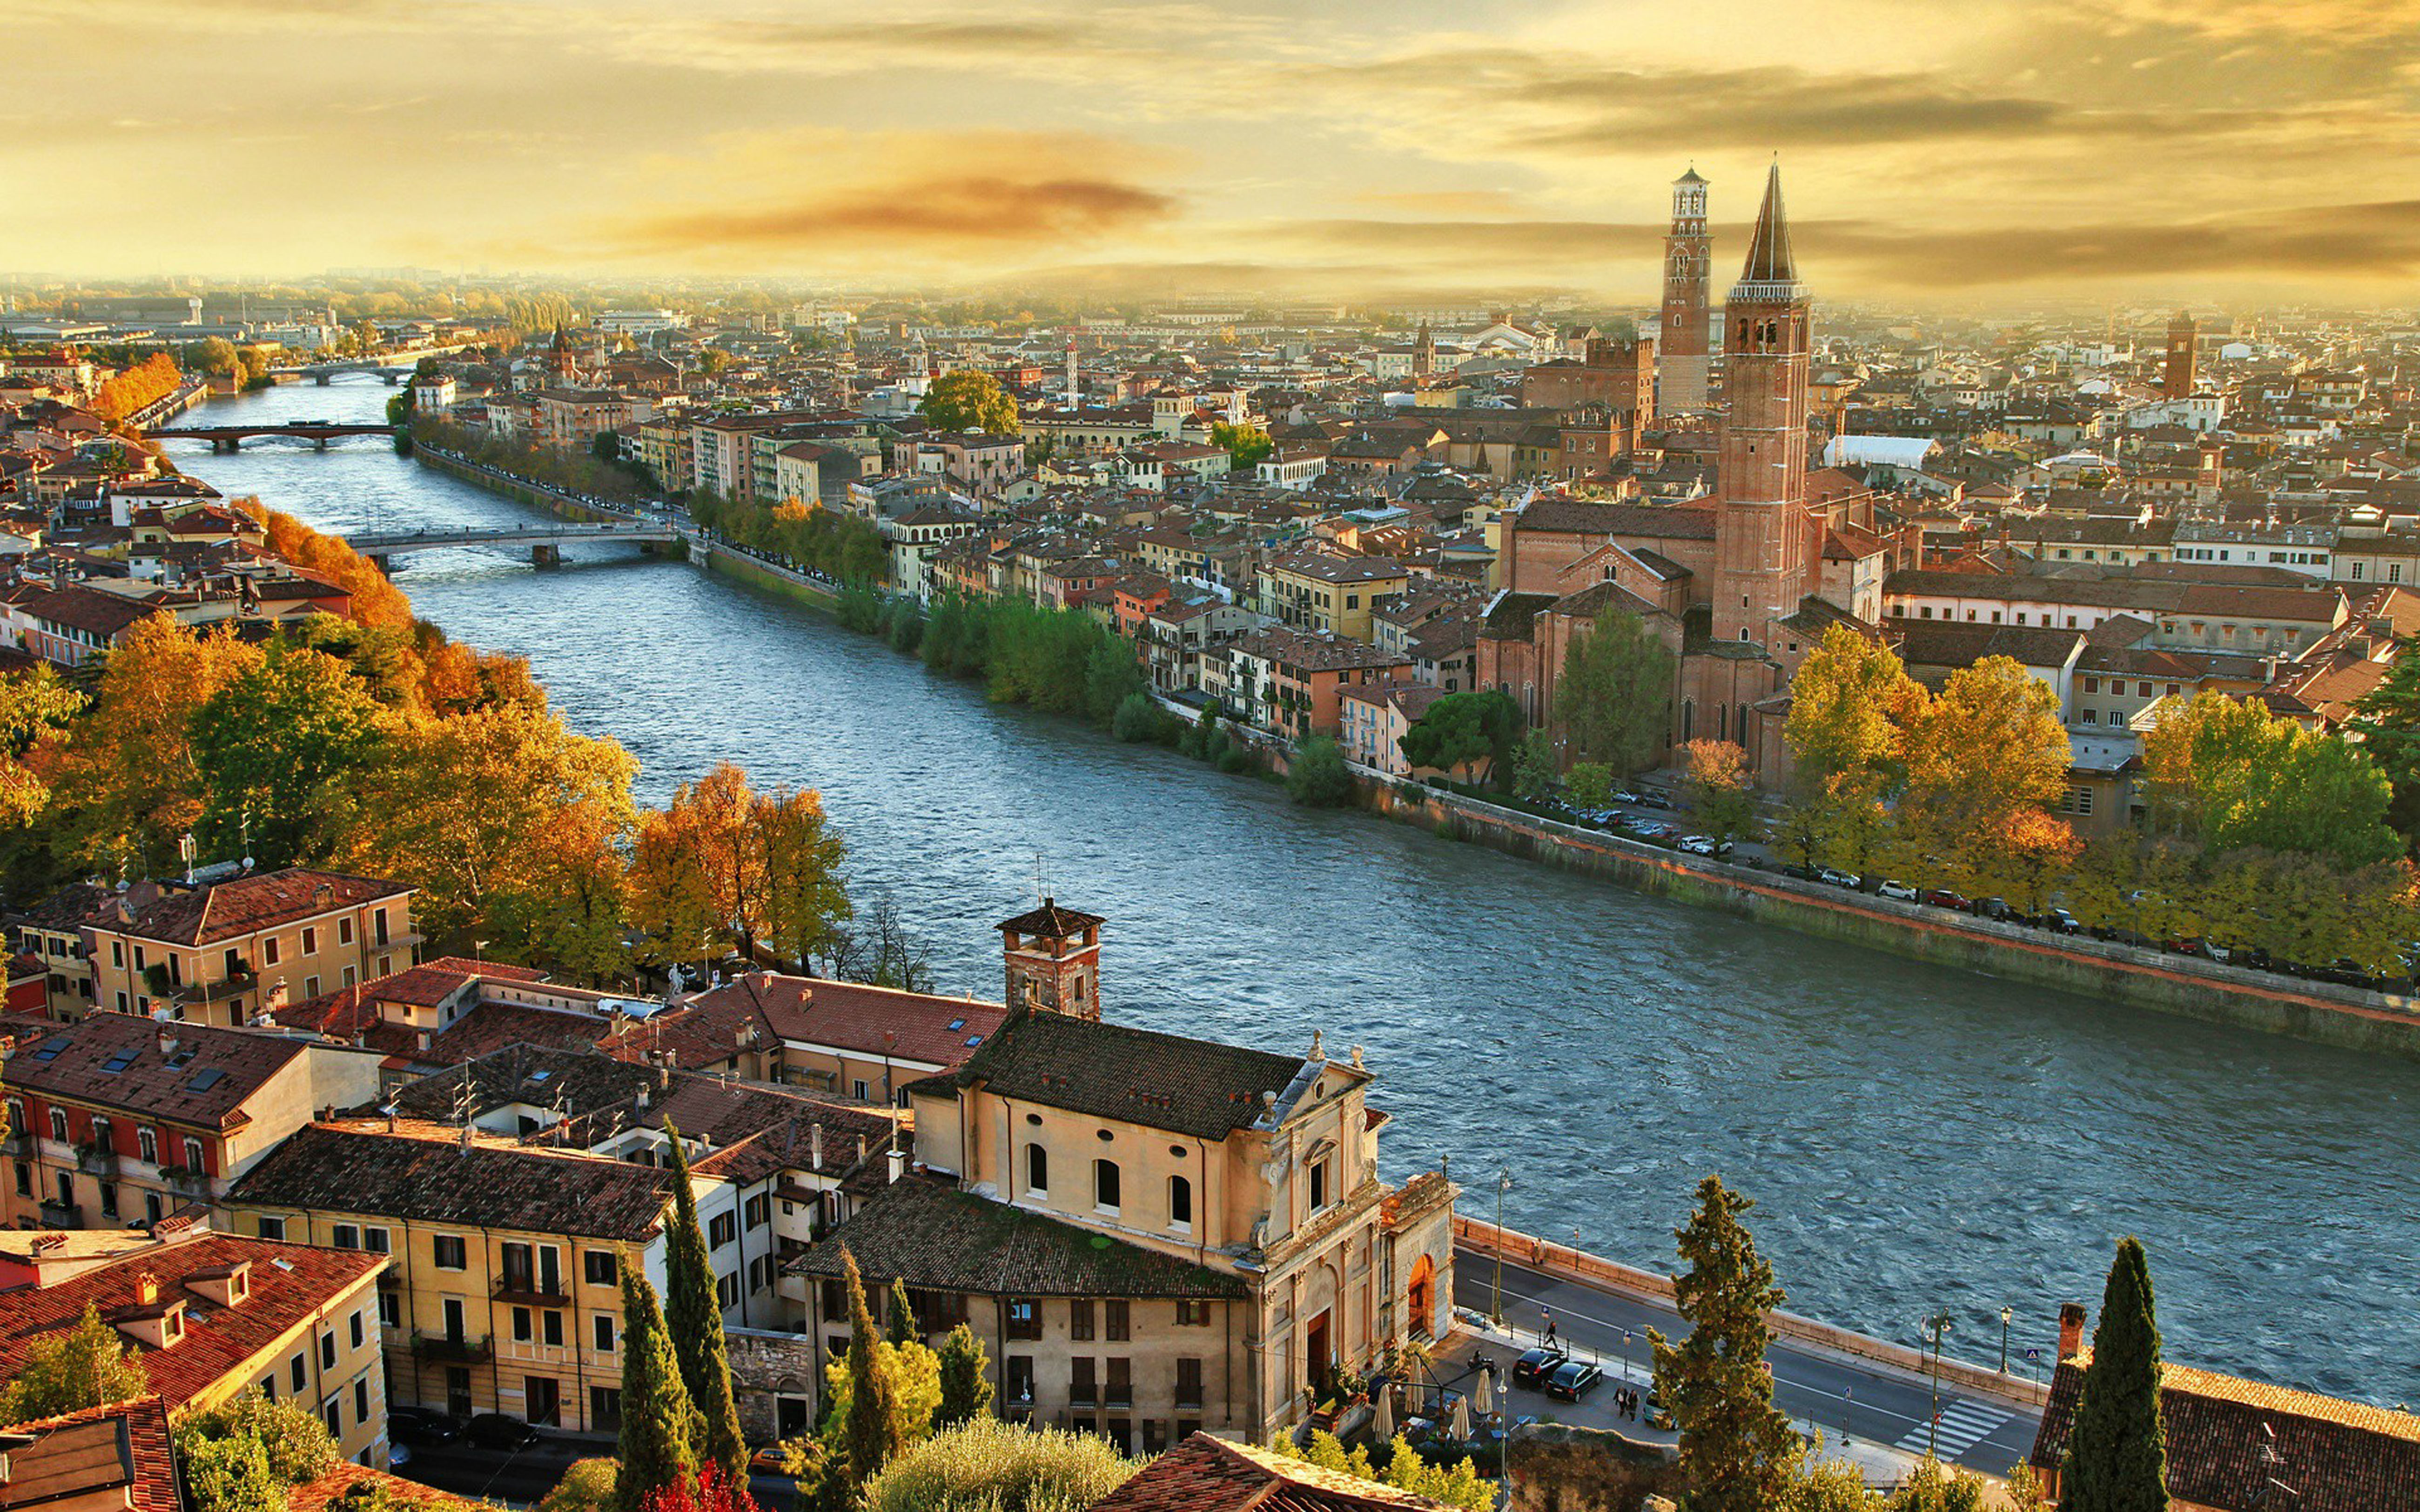 Verona And Adige River From The Bird's Eye View Beautiful City